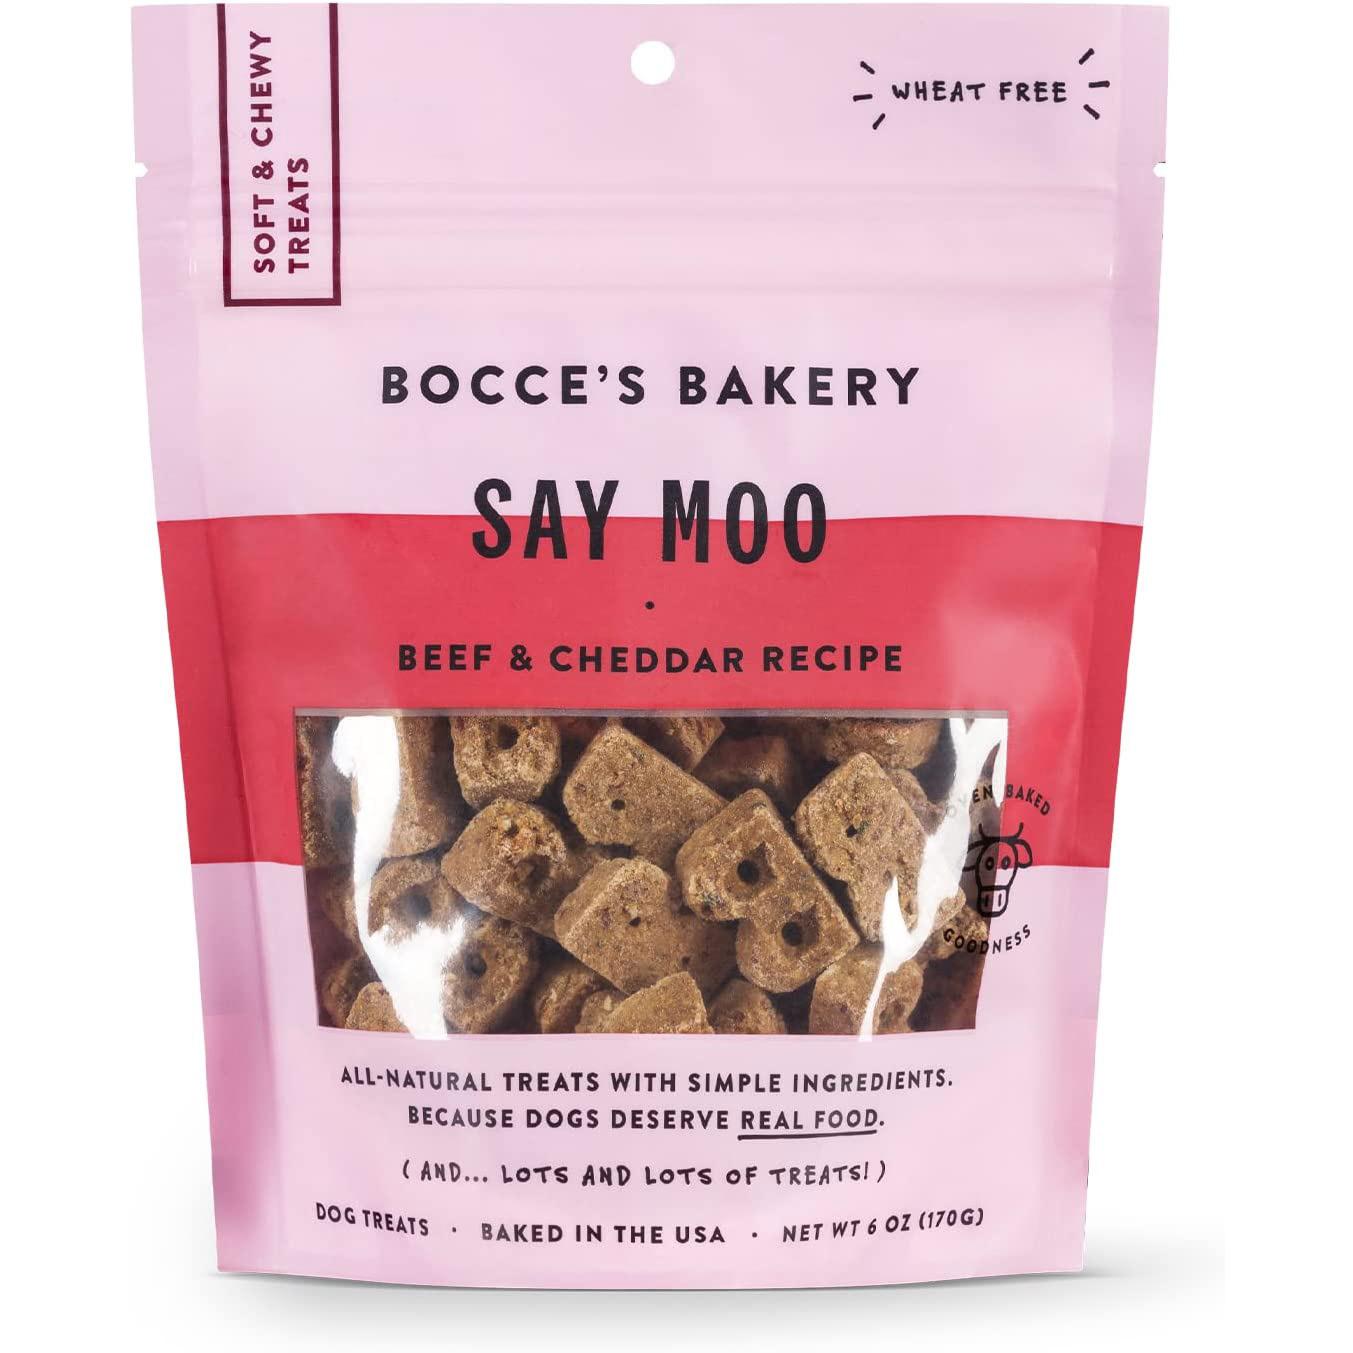 Bocces Bakery All Natural Soft and Chewy Dog Cookies for $3.19 Shipped